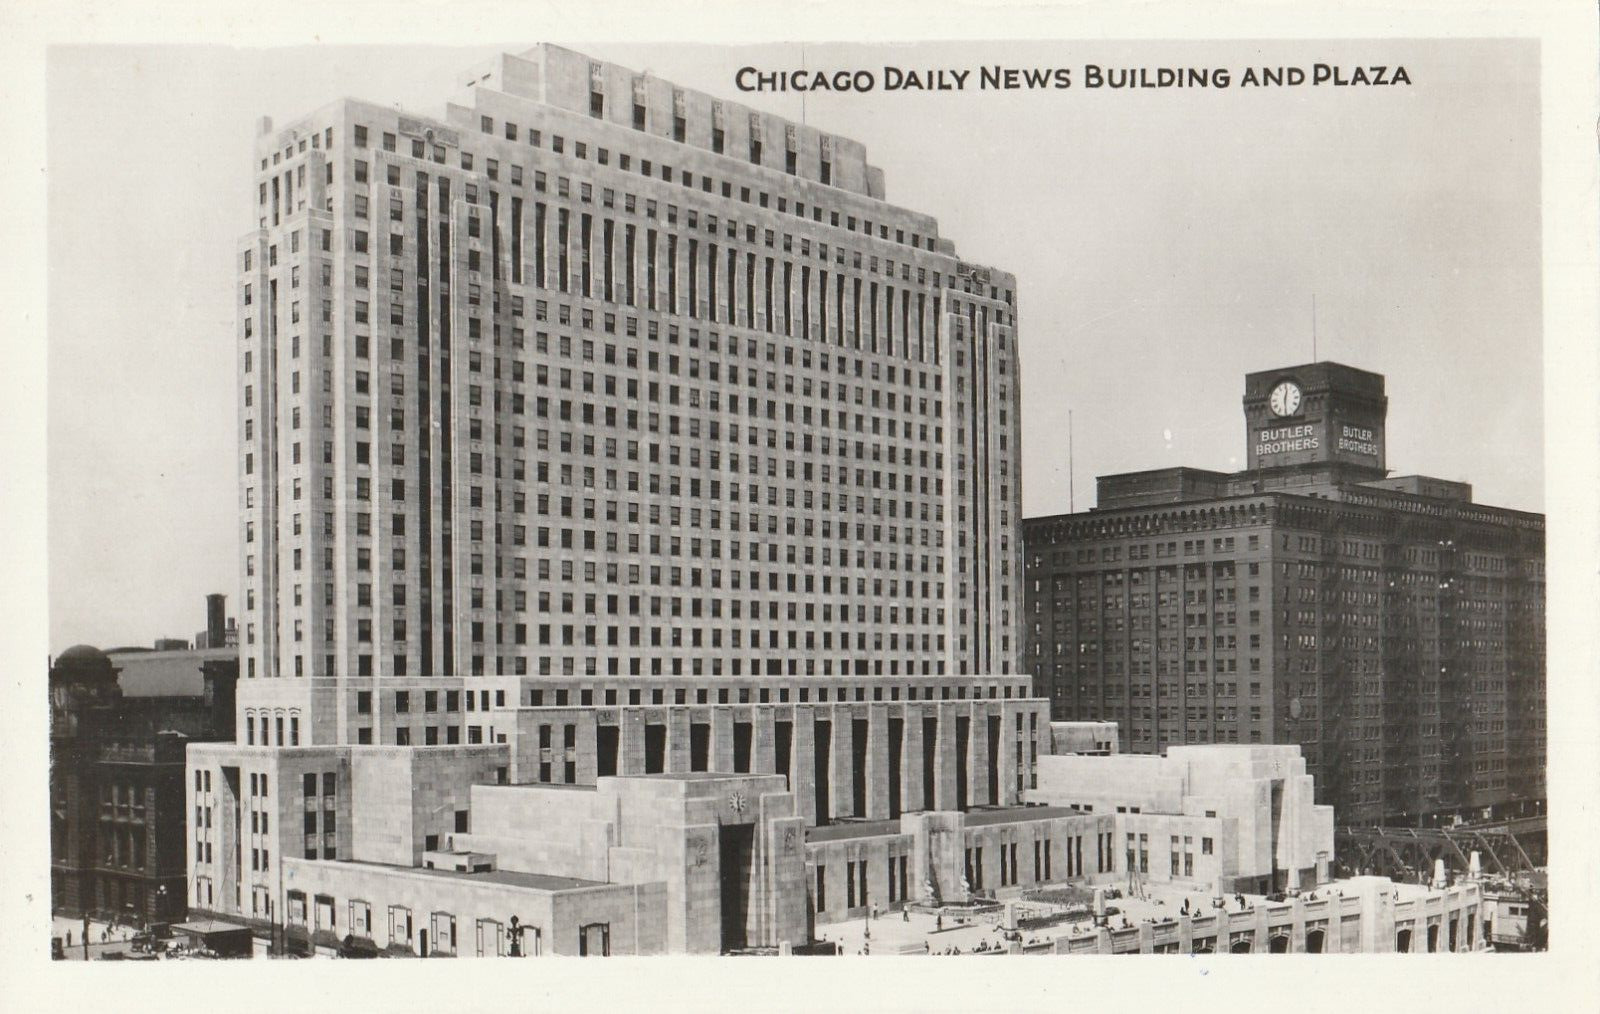 Vintage Postcard Chicago Daily News Building and Plaza Chicago, Illinois B&W